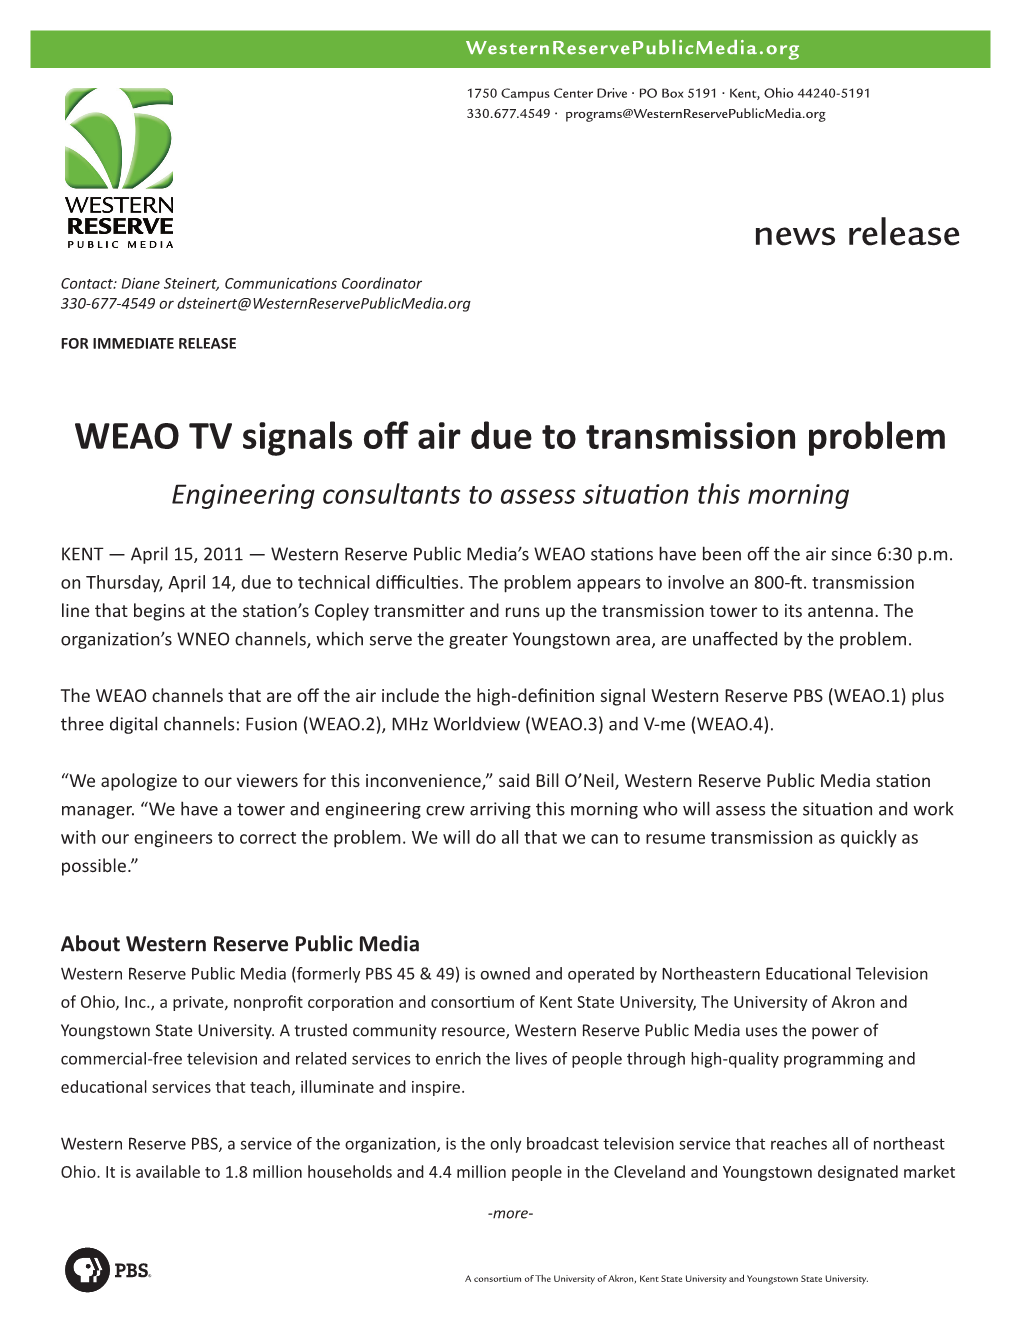 News Release WEAO TV Signals Off Air Due to Transmission Problem